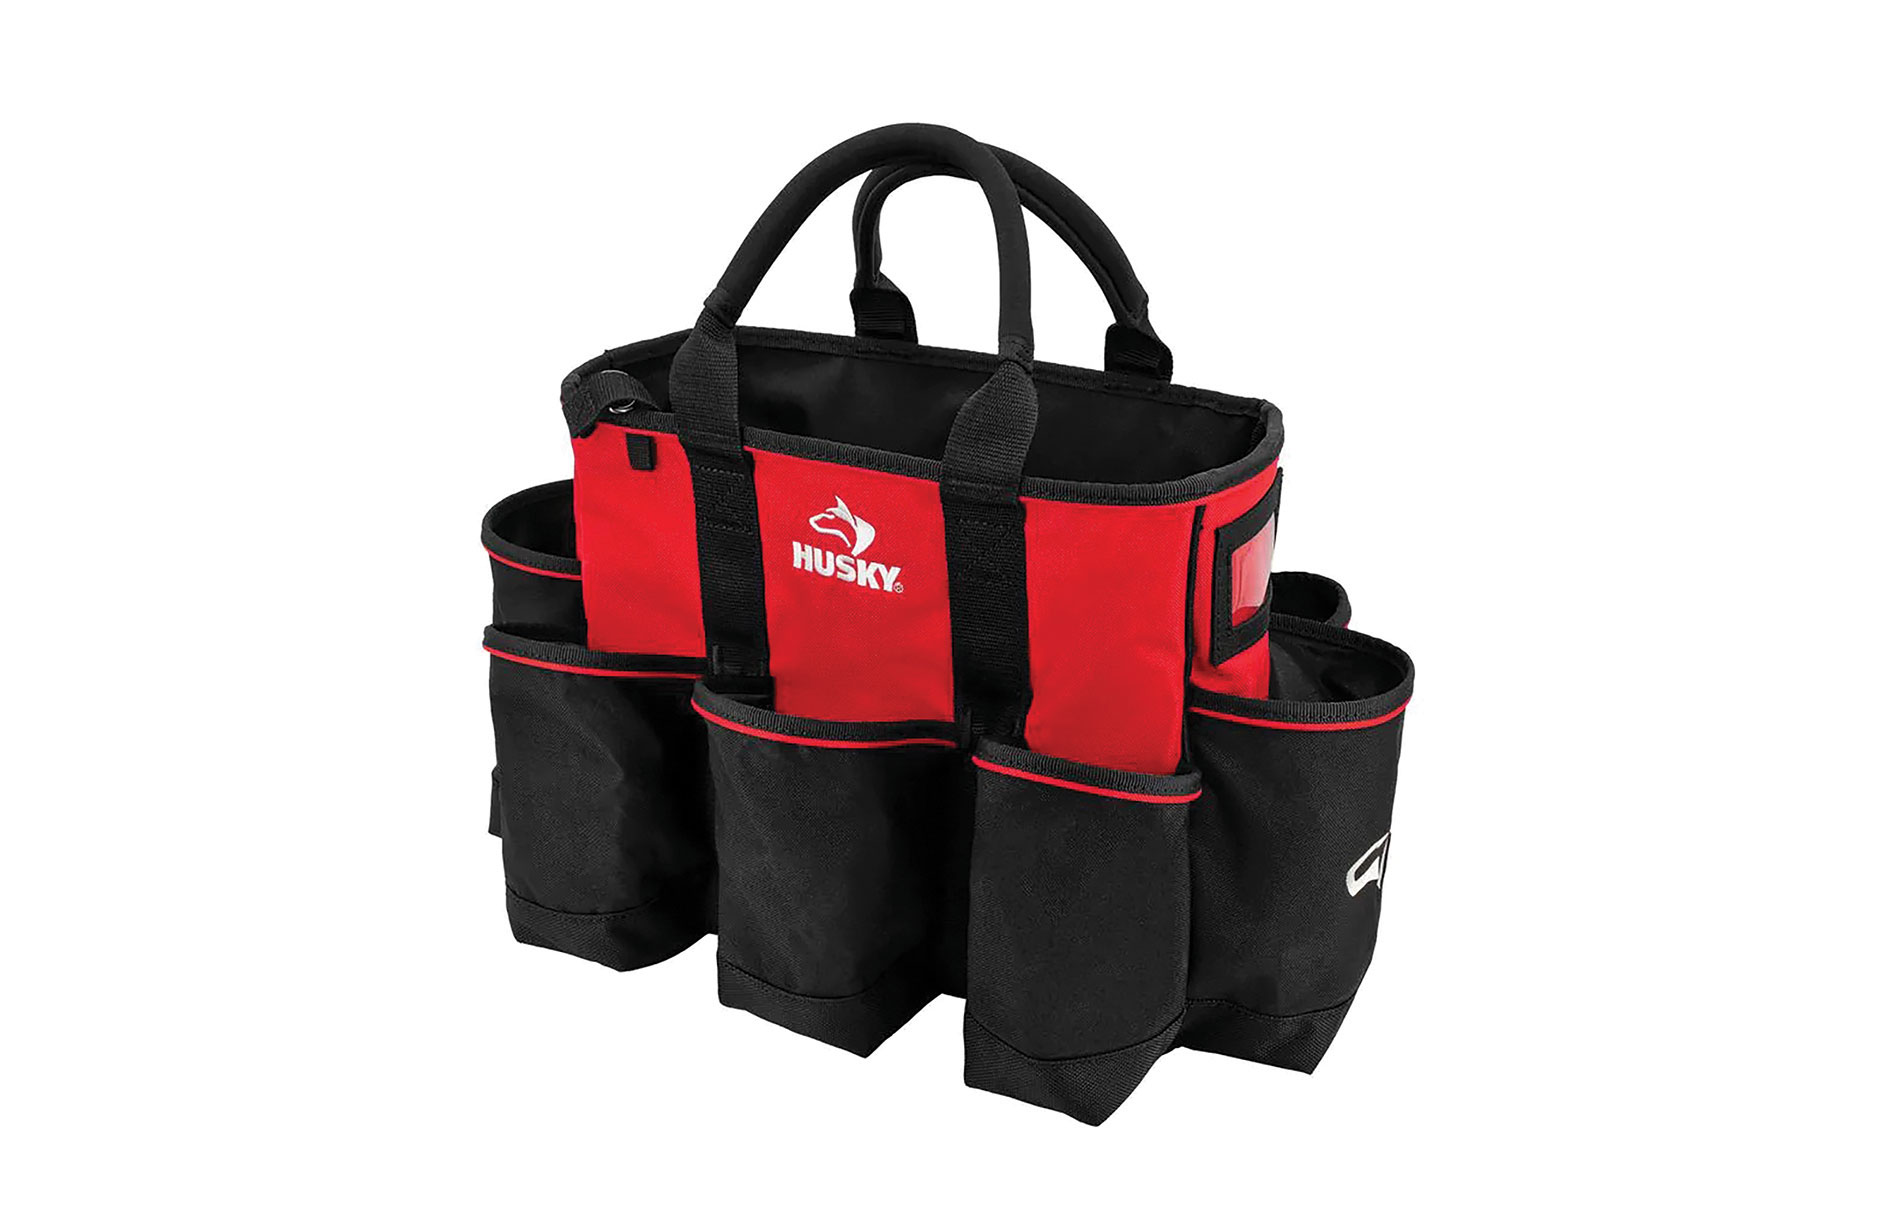 Black and red tool bag with external pockets and white Husky logo. Image by Husky.